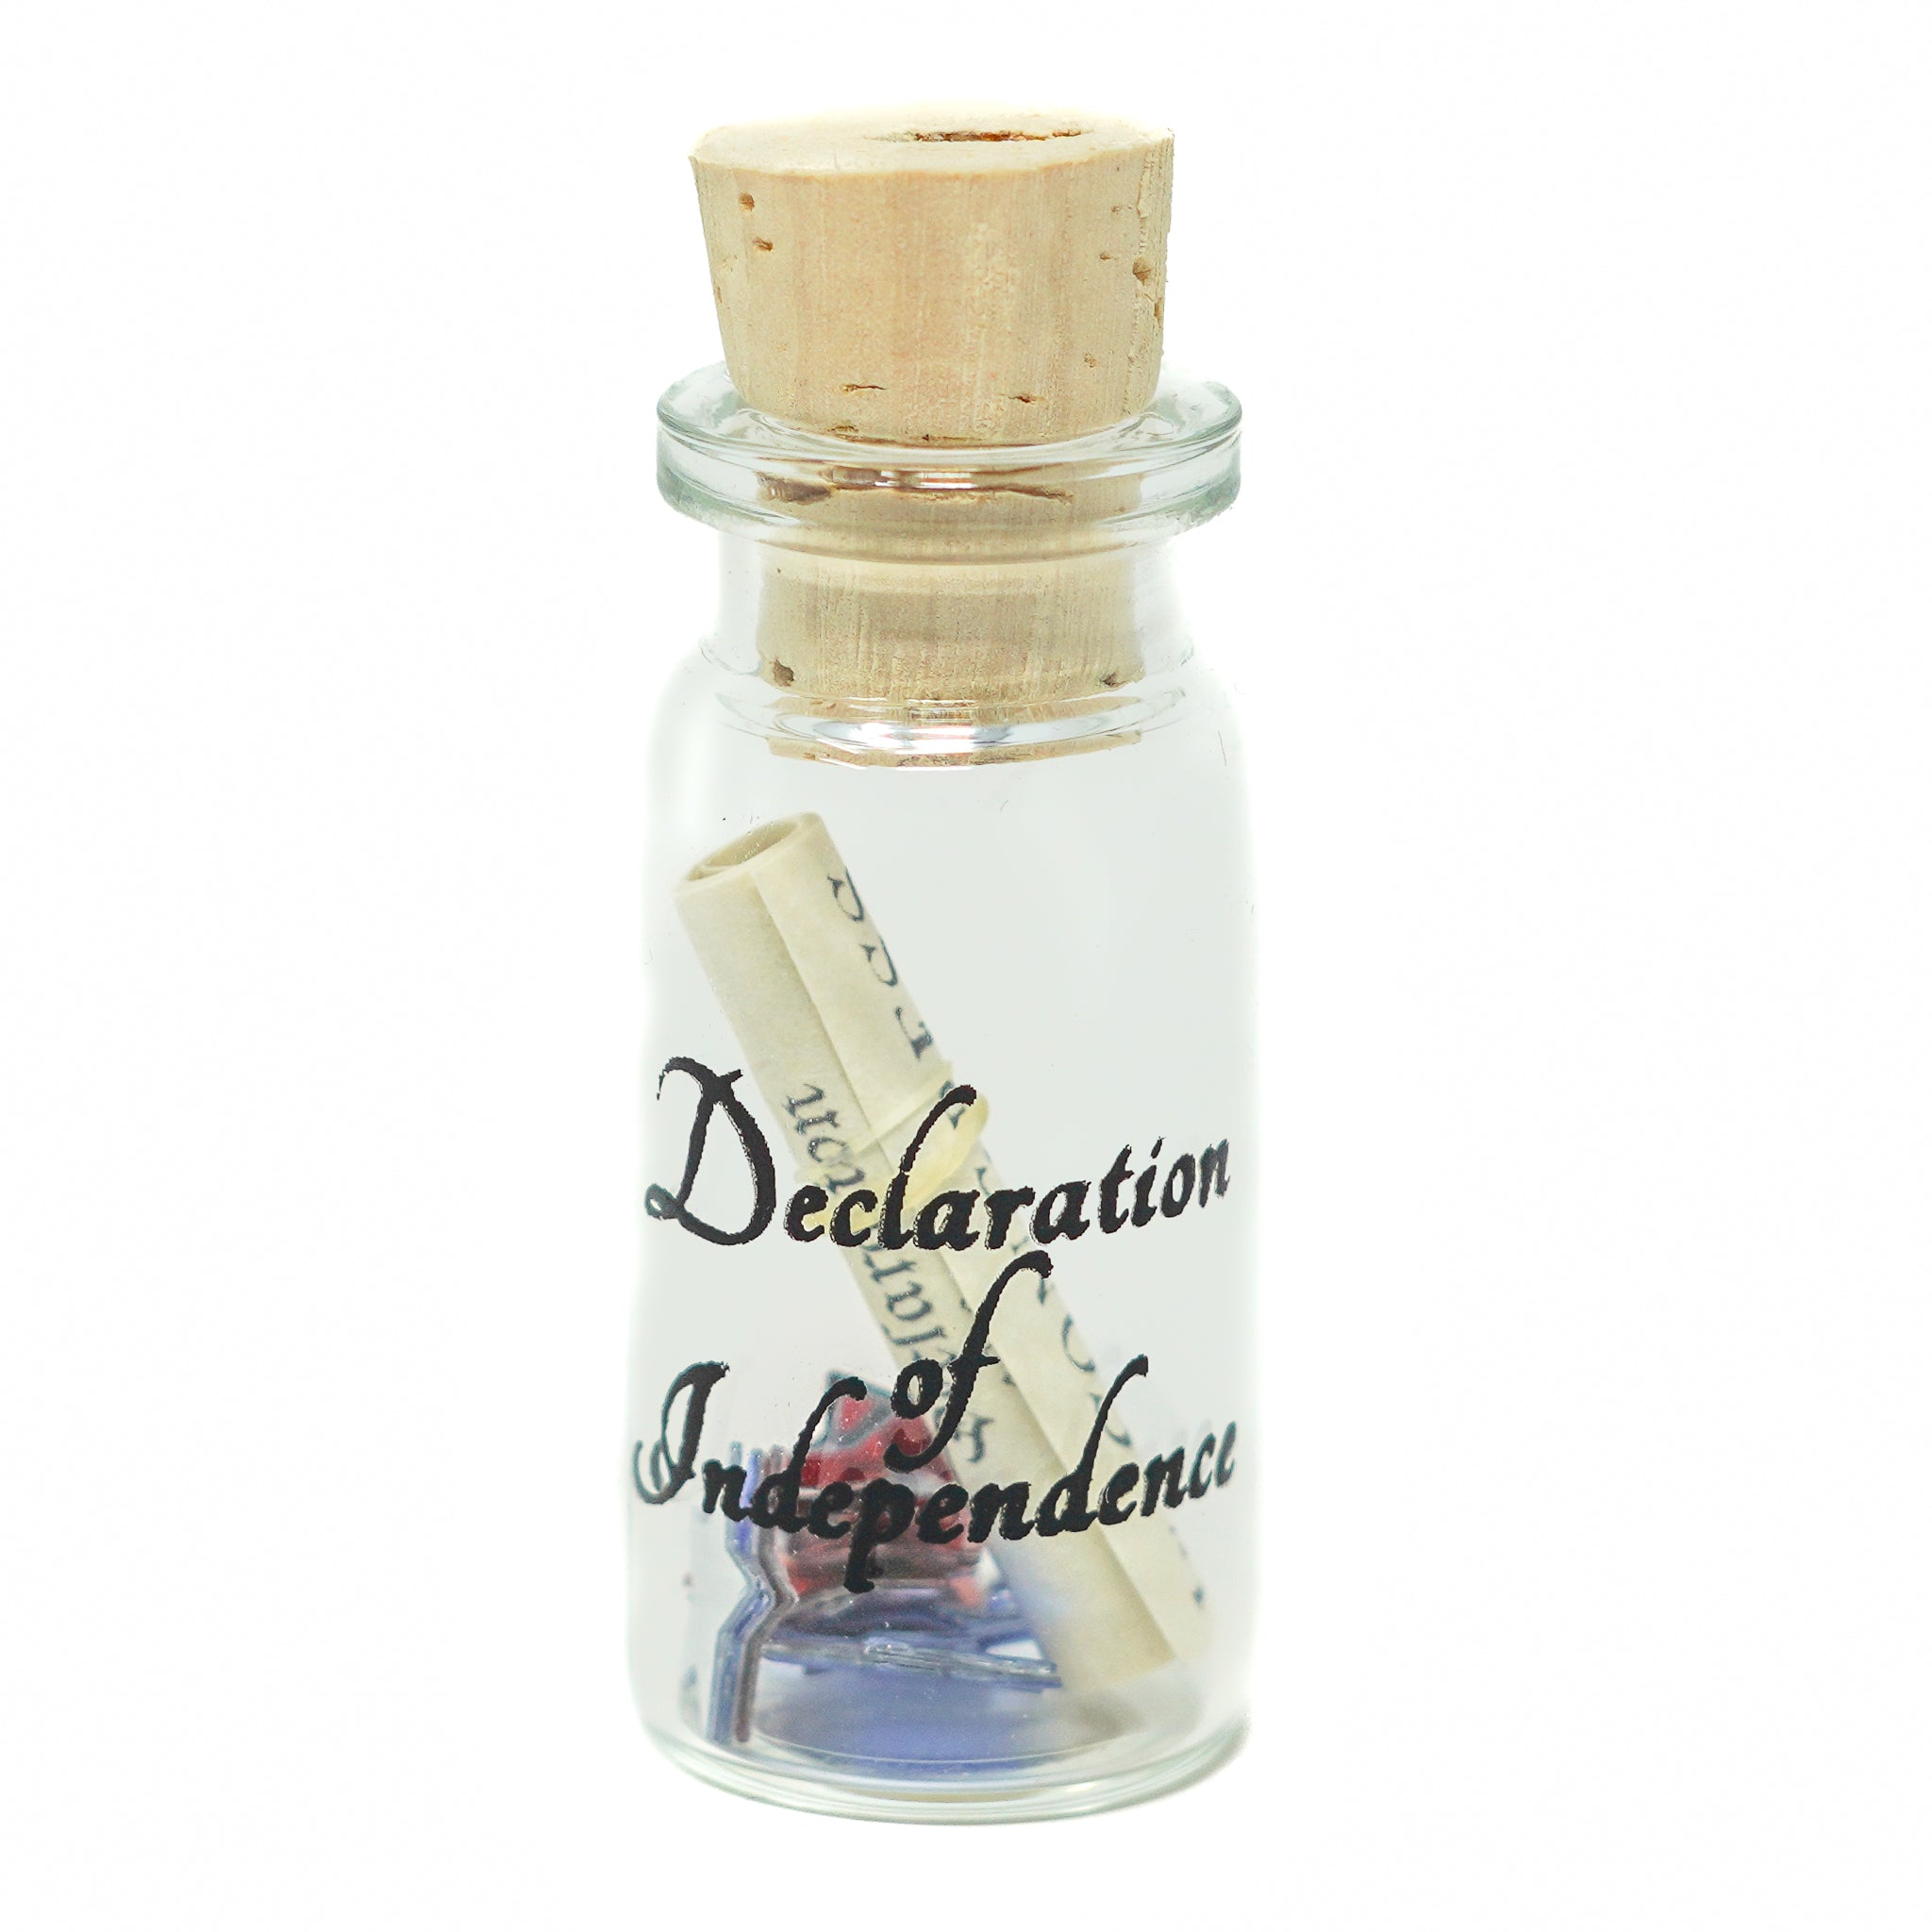 Message in a Bottle (The Declaration of Independence or The Constitution)